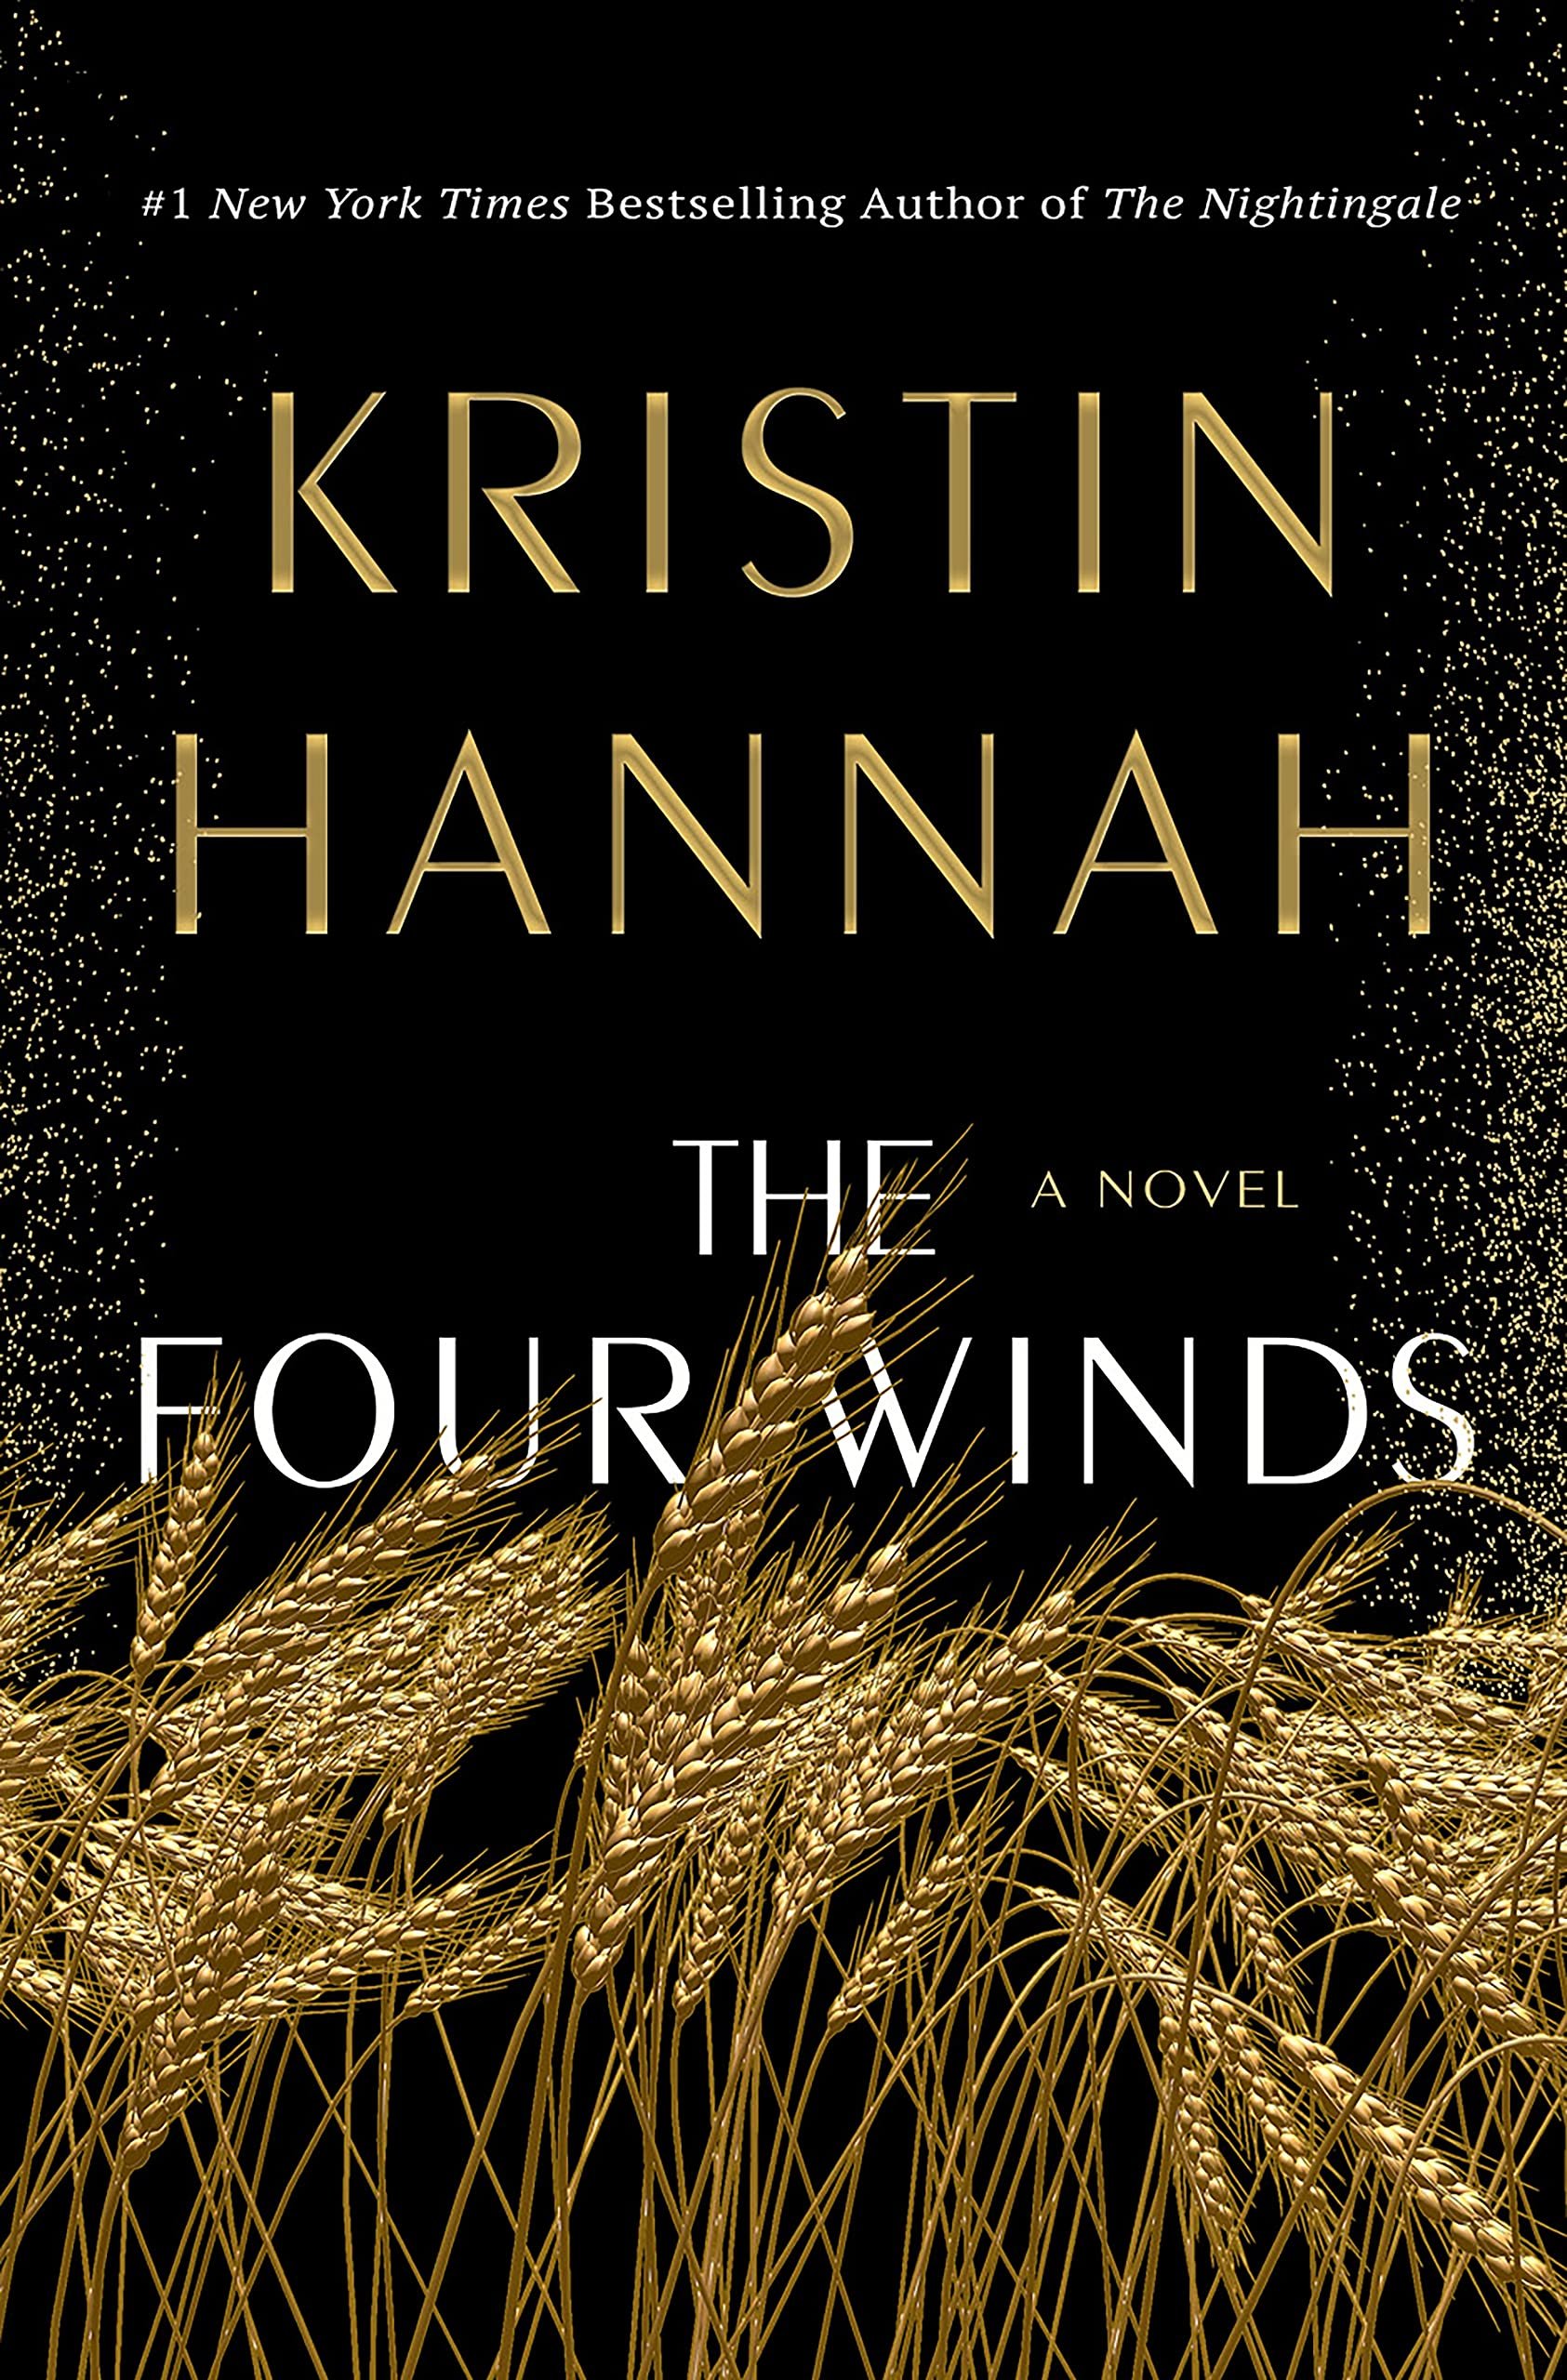 The Four Winds Book Cover